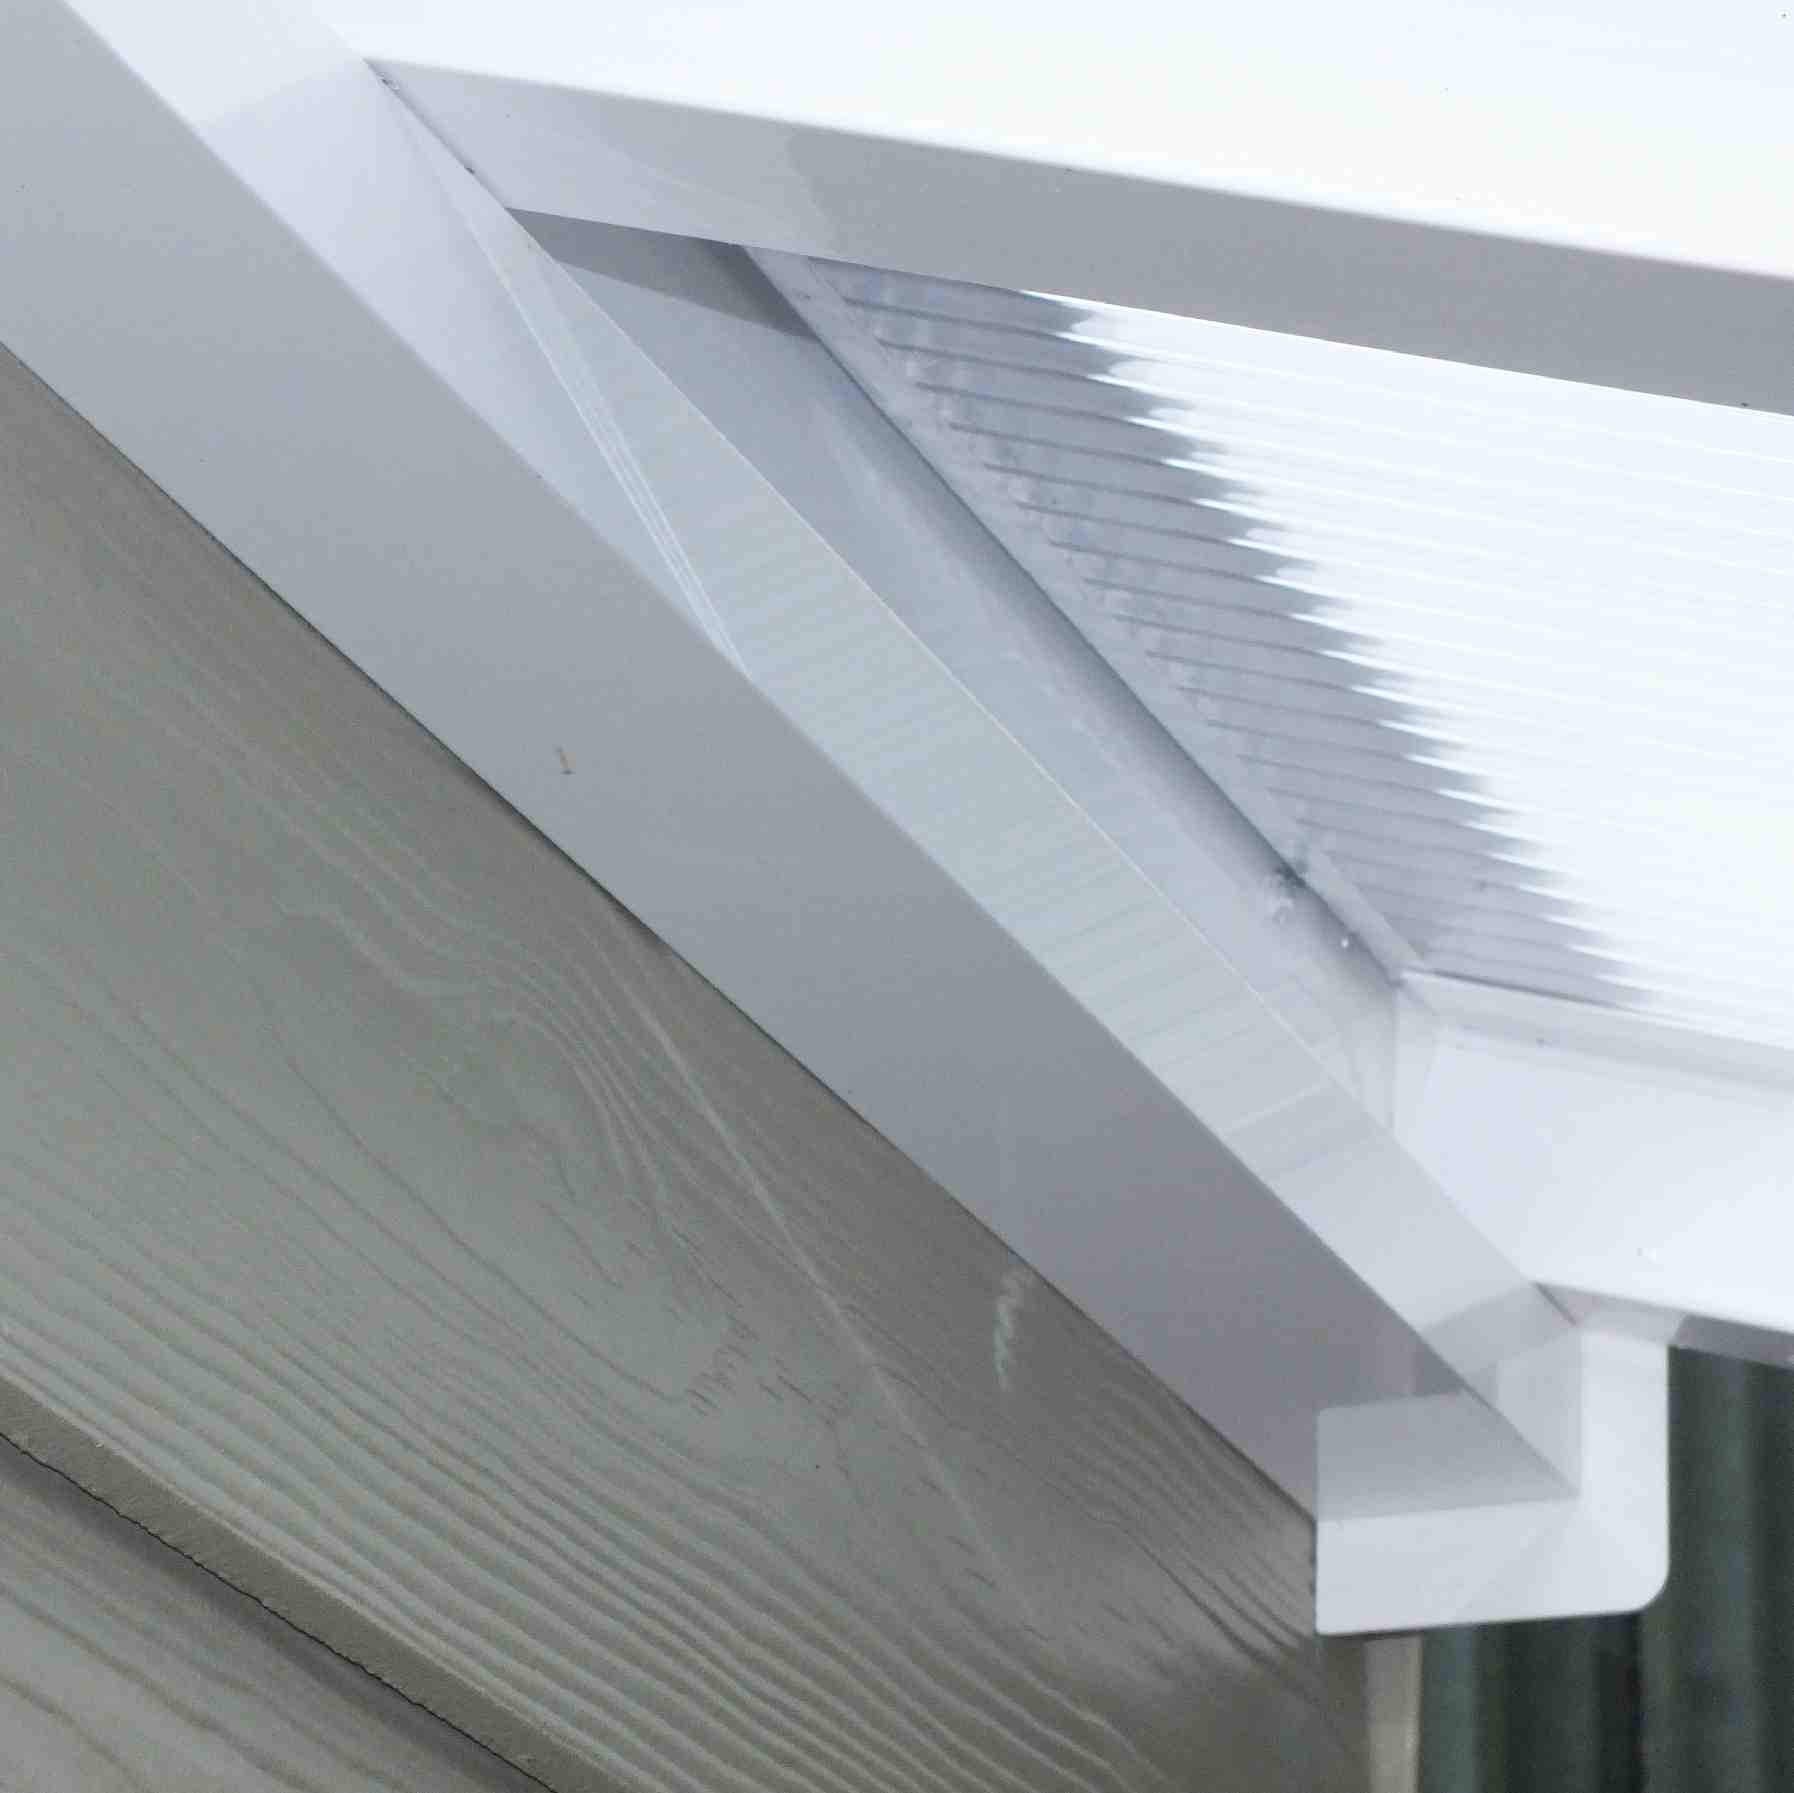 Great deals on Omega Verandah White with 6mm Glass Clear Plate Polycarbonate Glazing - 8.4m (W) x 3.0m (P), (4) Supporting Posts